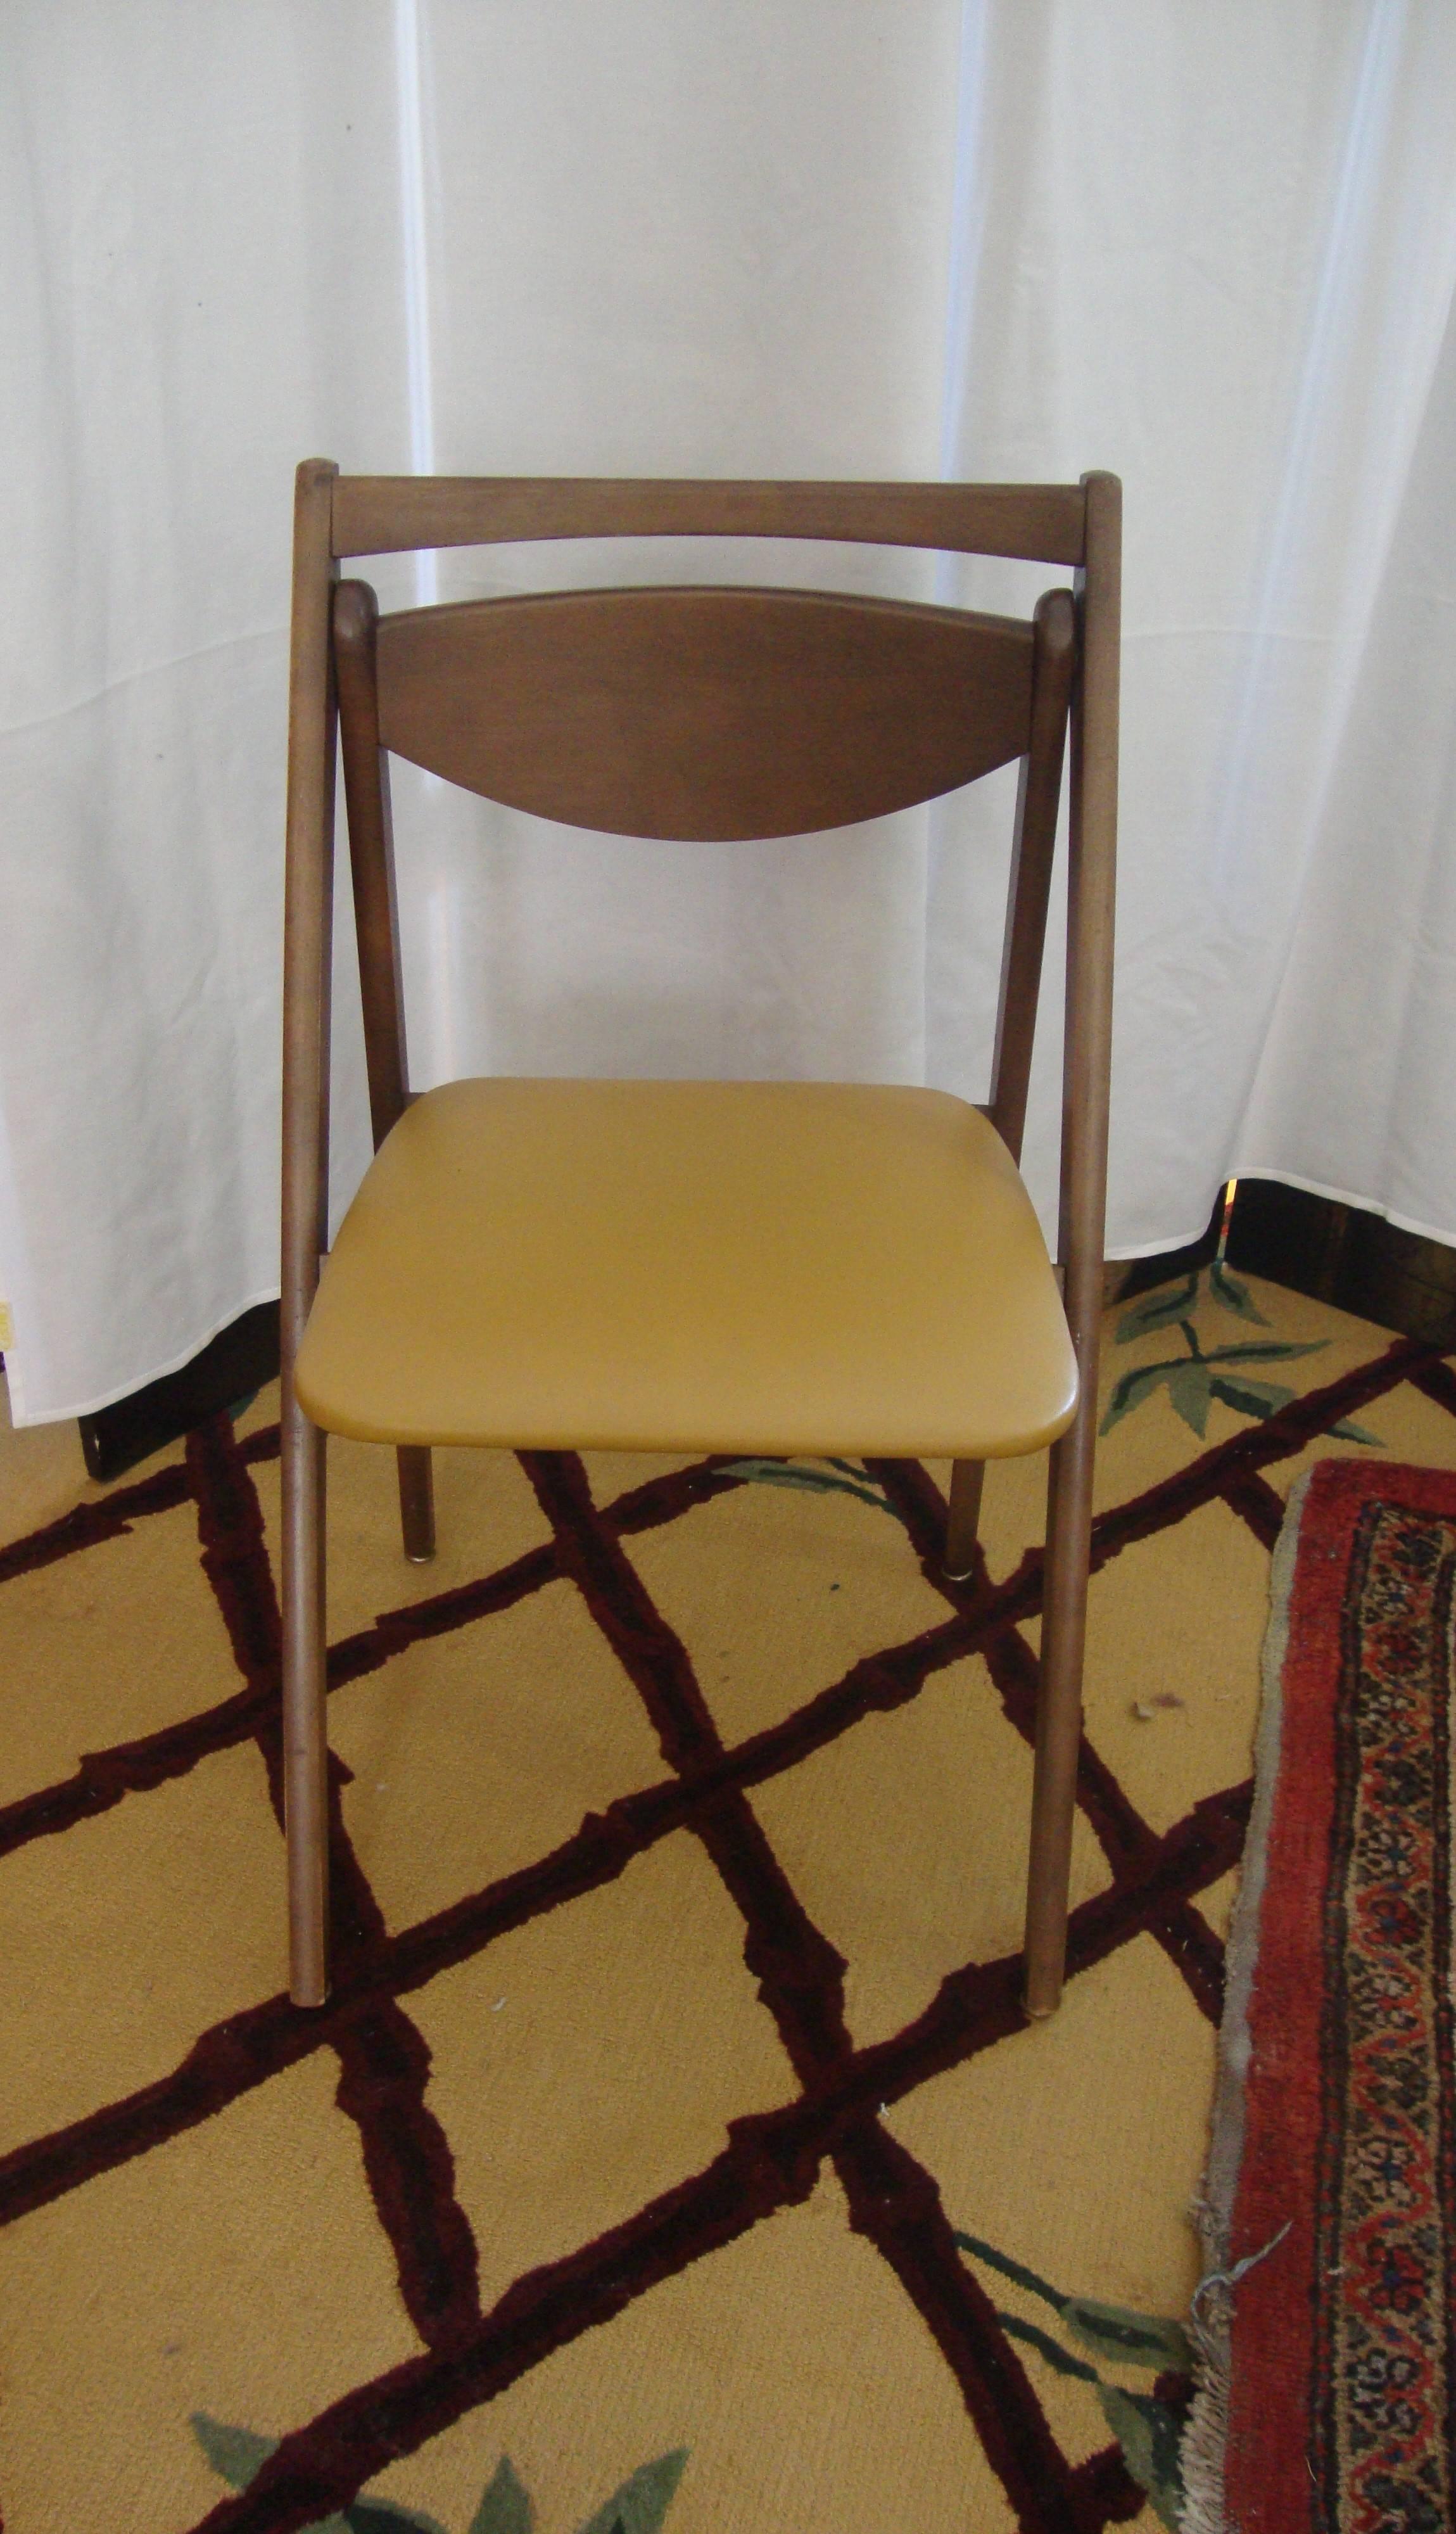 A fantastic pair of 1950s Stakmore leather and walnut folding chairs. Great for a bistro table, desk or side chairs or to pull up when needed. Exquisite leather and the frame is solid mahogany. Beautiful condition.



Measures: seat height - 17